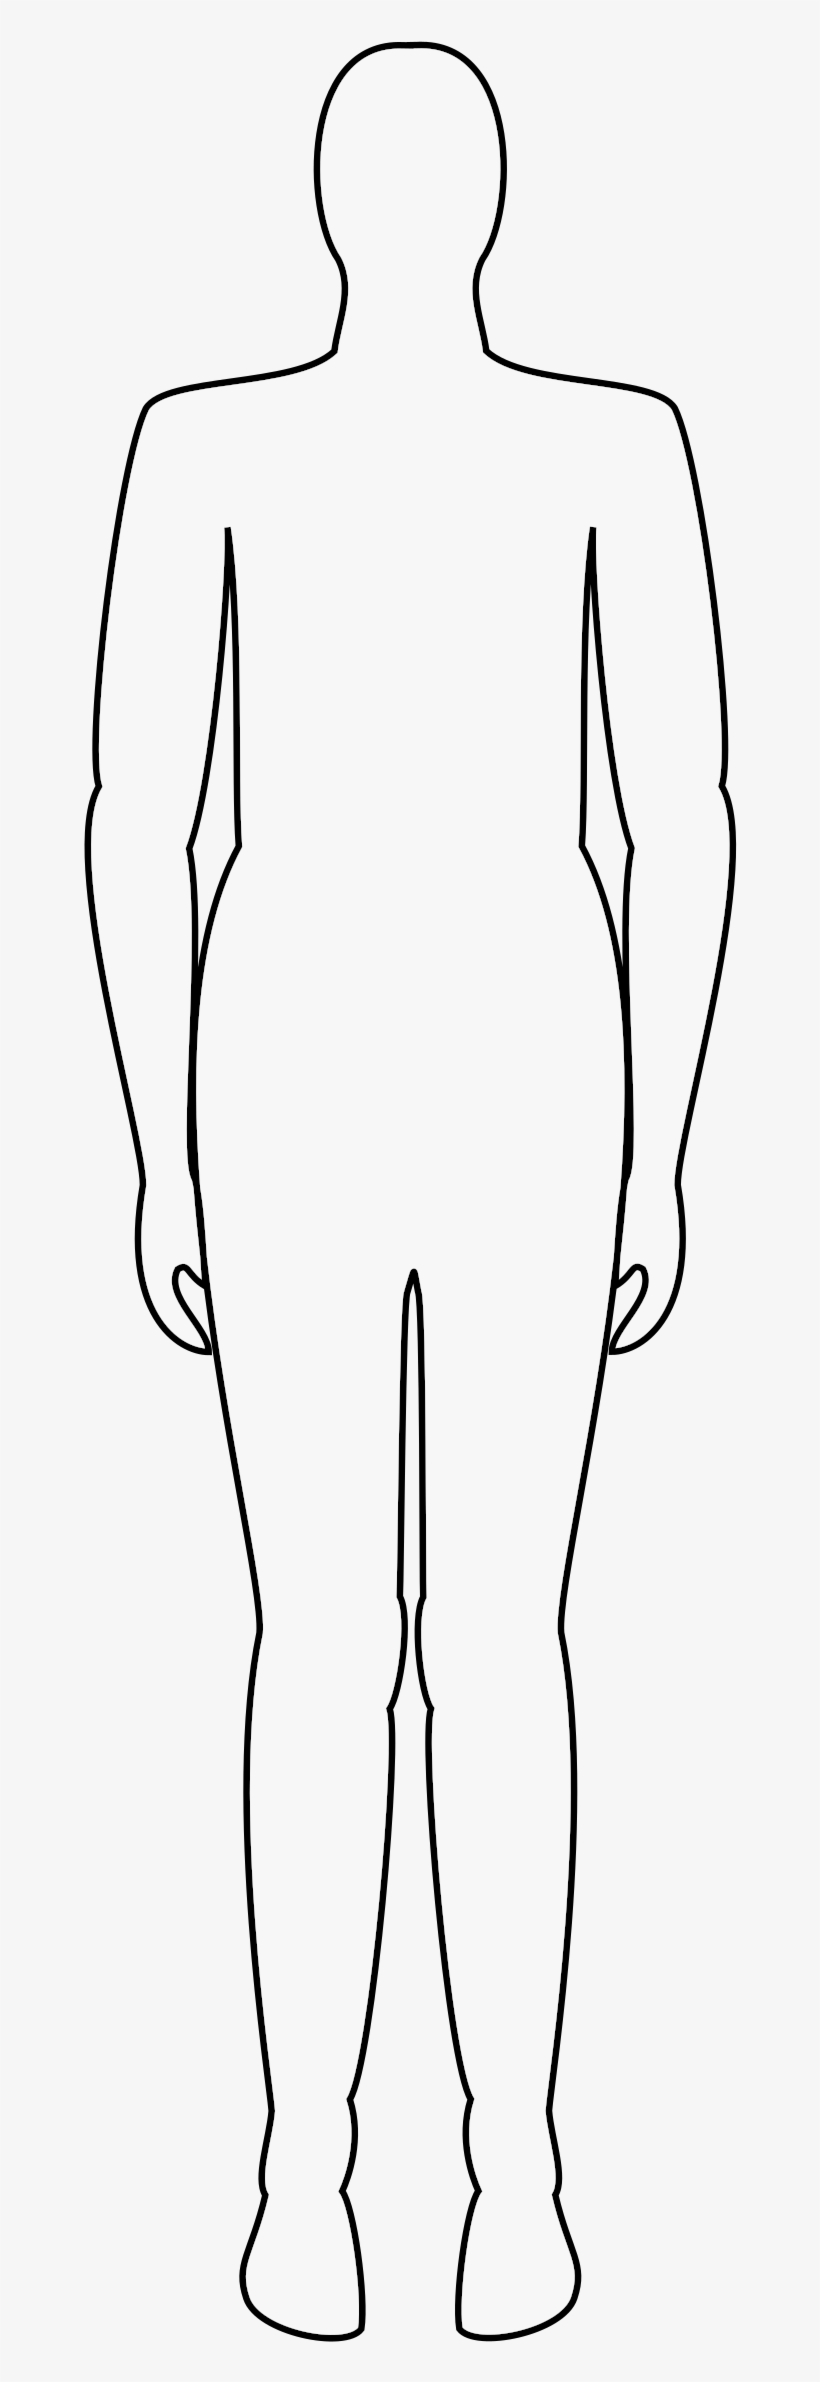 This Free Icons Png Design Of Male Body Silhouette, transparent png #716271